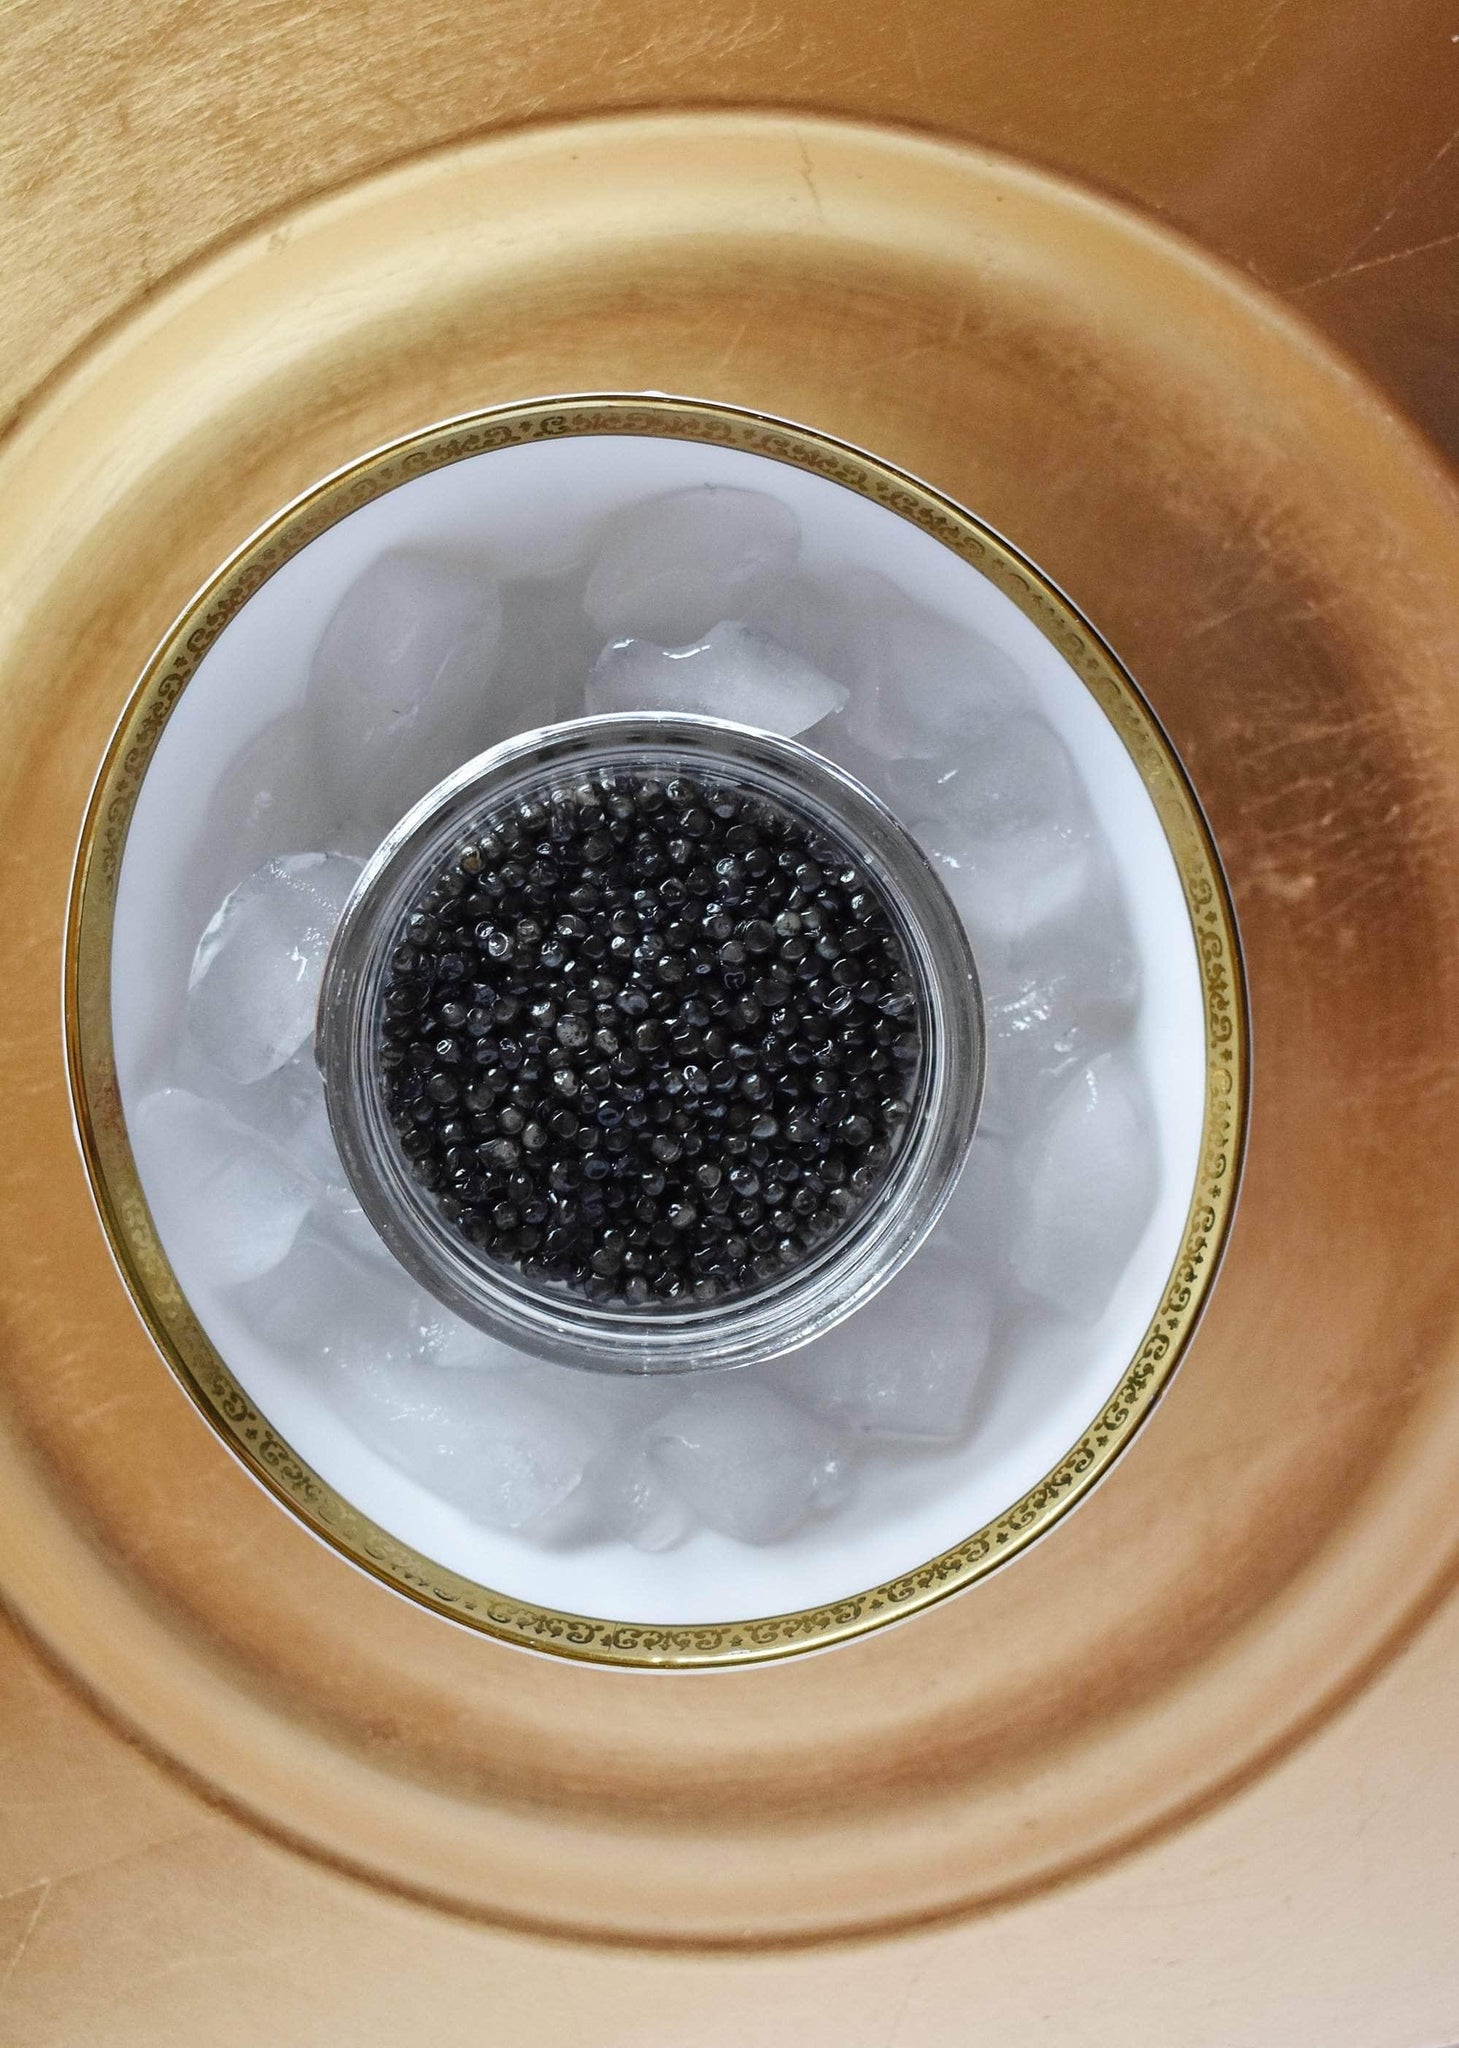 WHERE'S THE BEST PLACE TO BUY RUSSIAN CAVIAR?